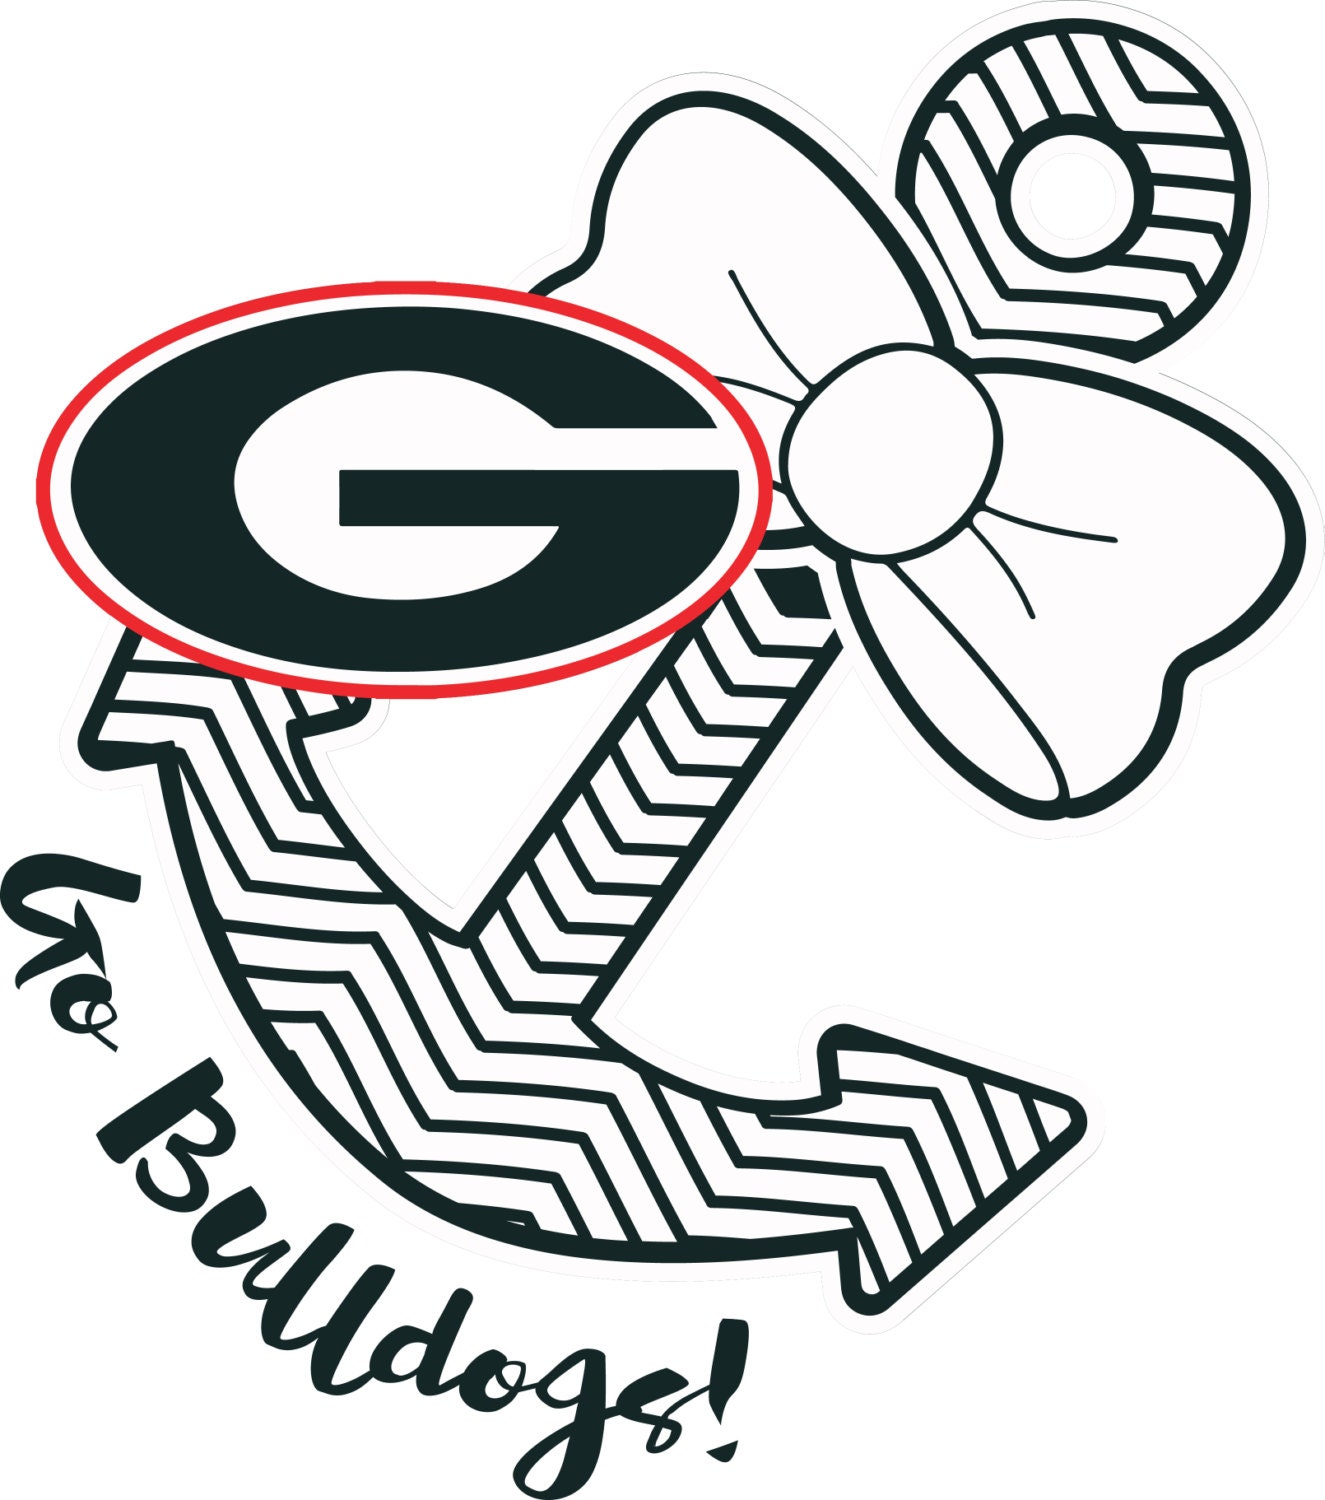  Ga Bulldog Coloring Pages in the world Check it out now 